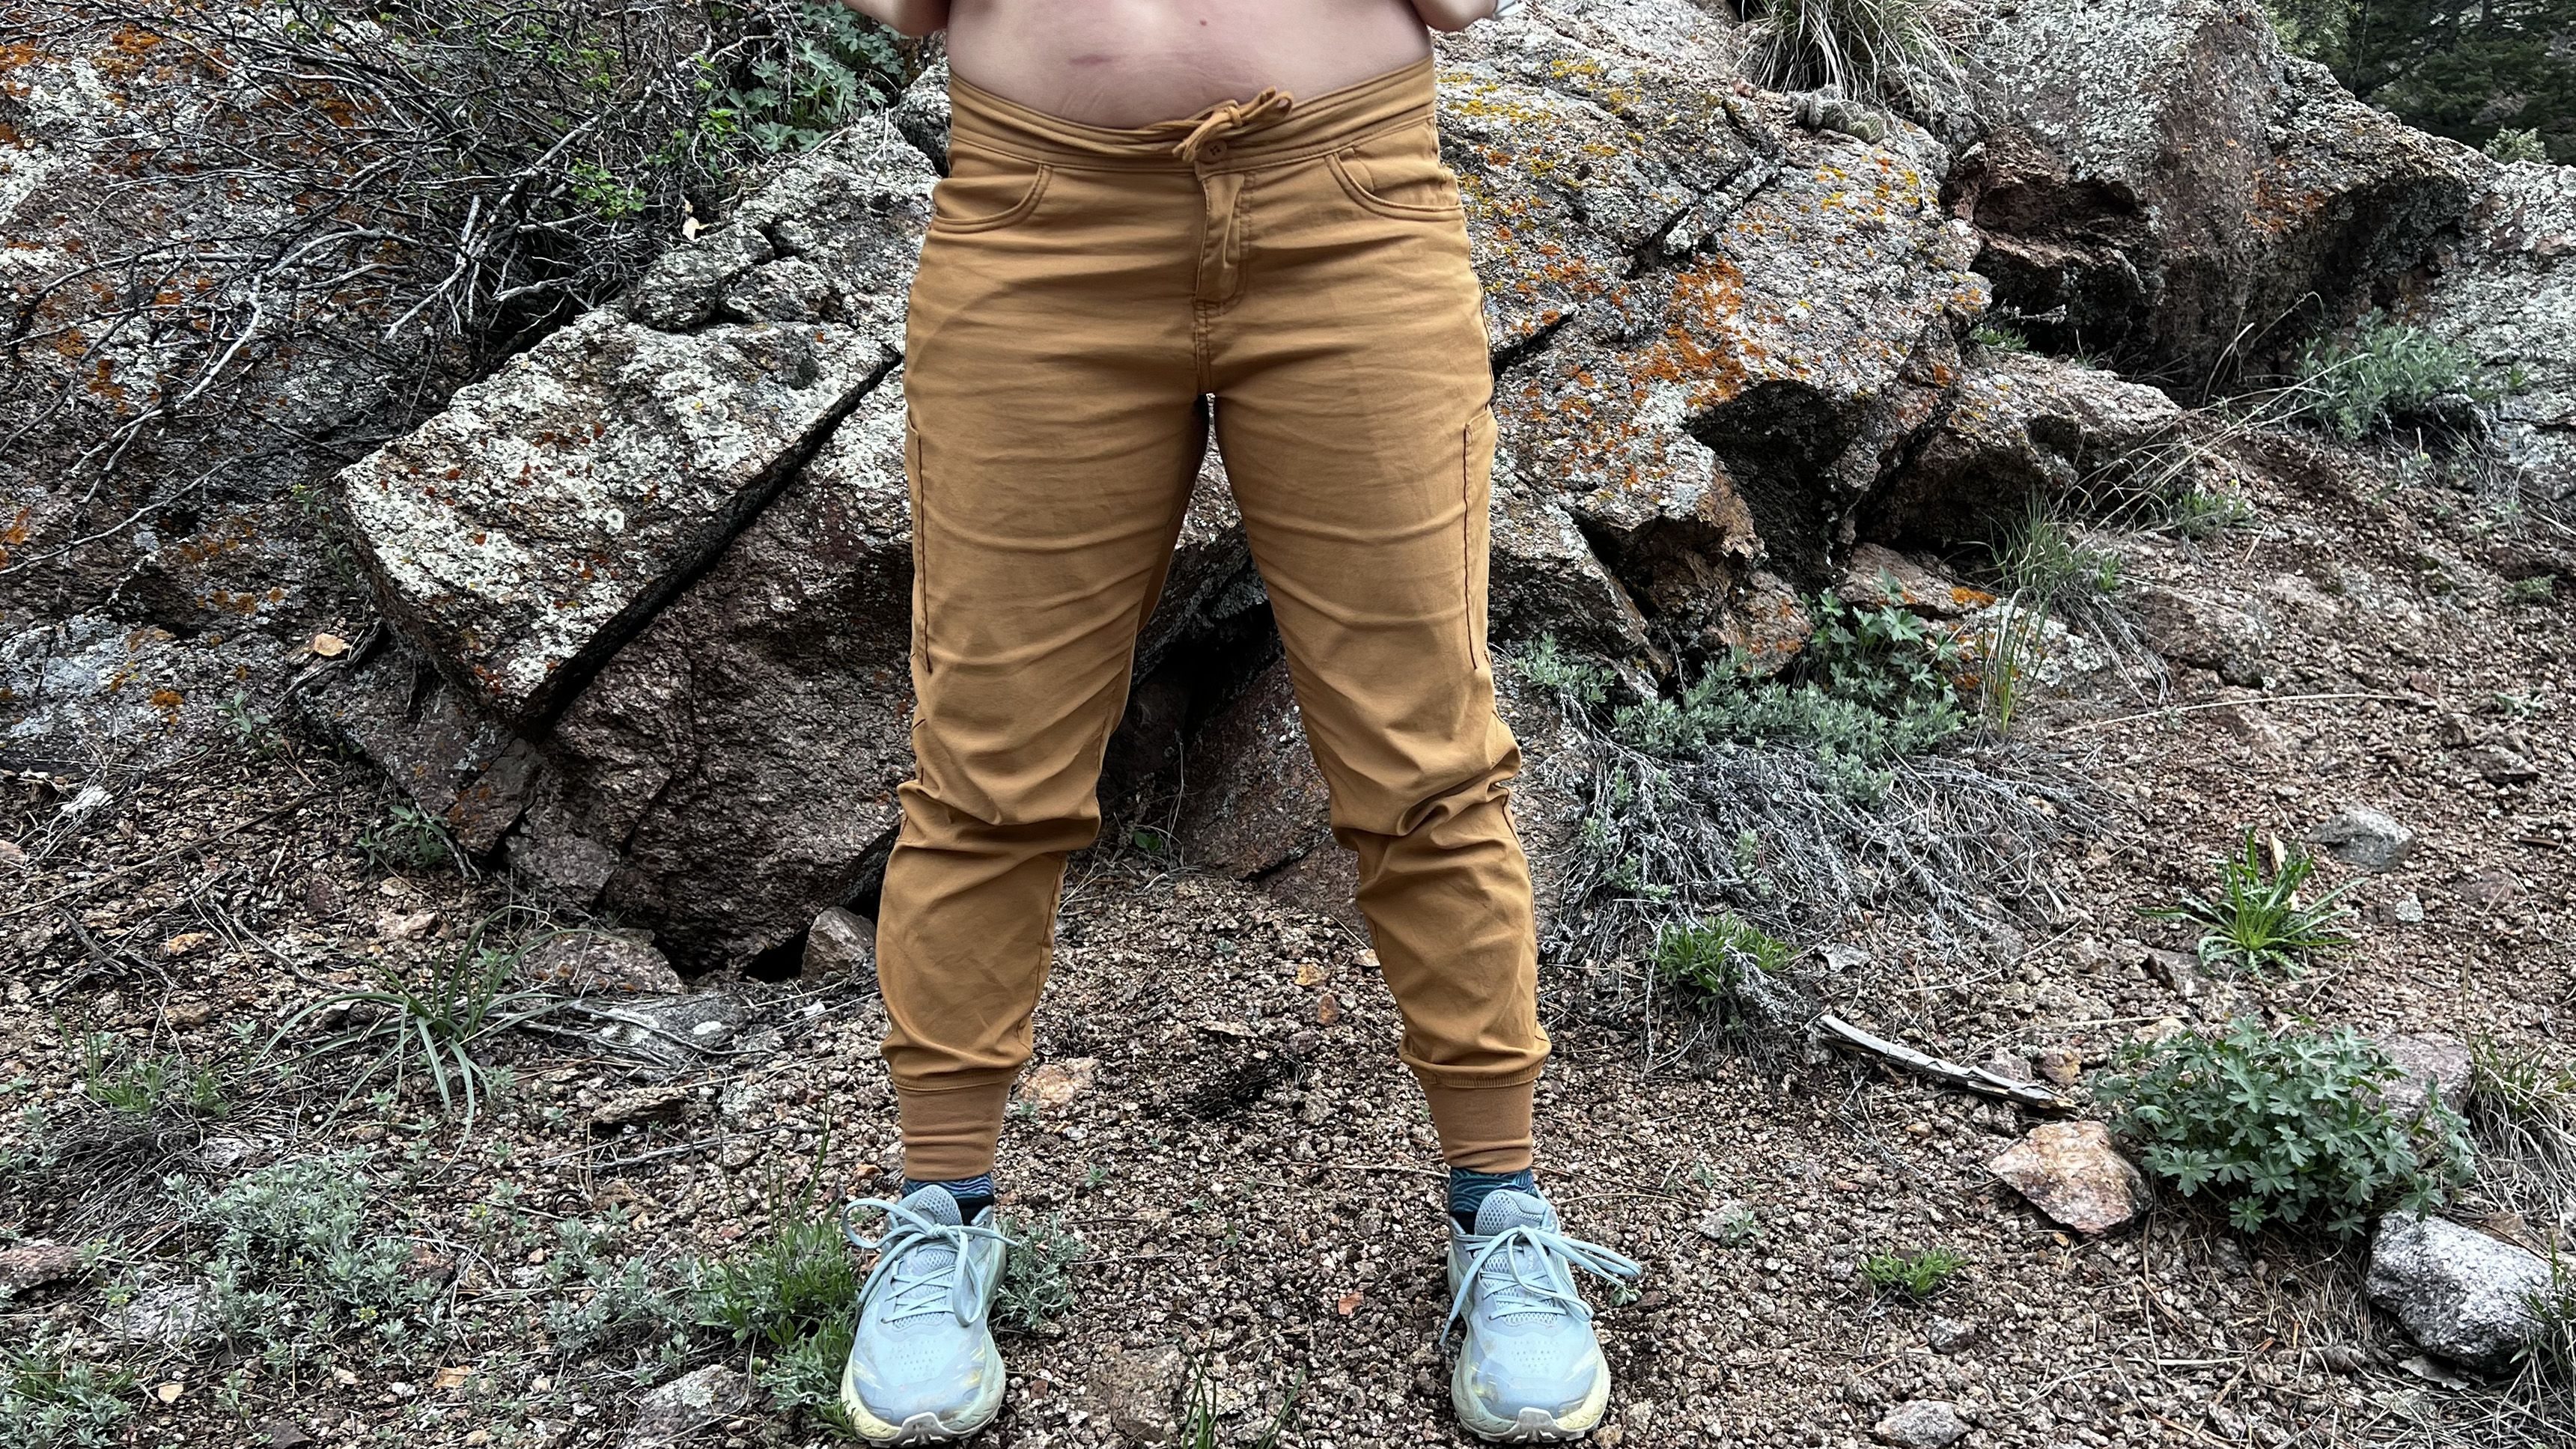 Prana Halle Jogger II review: Style from trail to town | CNN Underscored